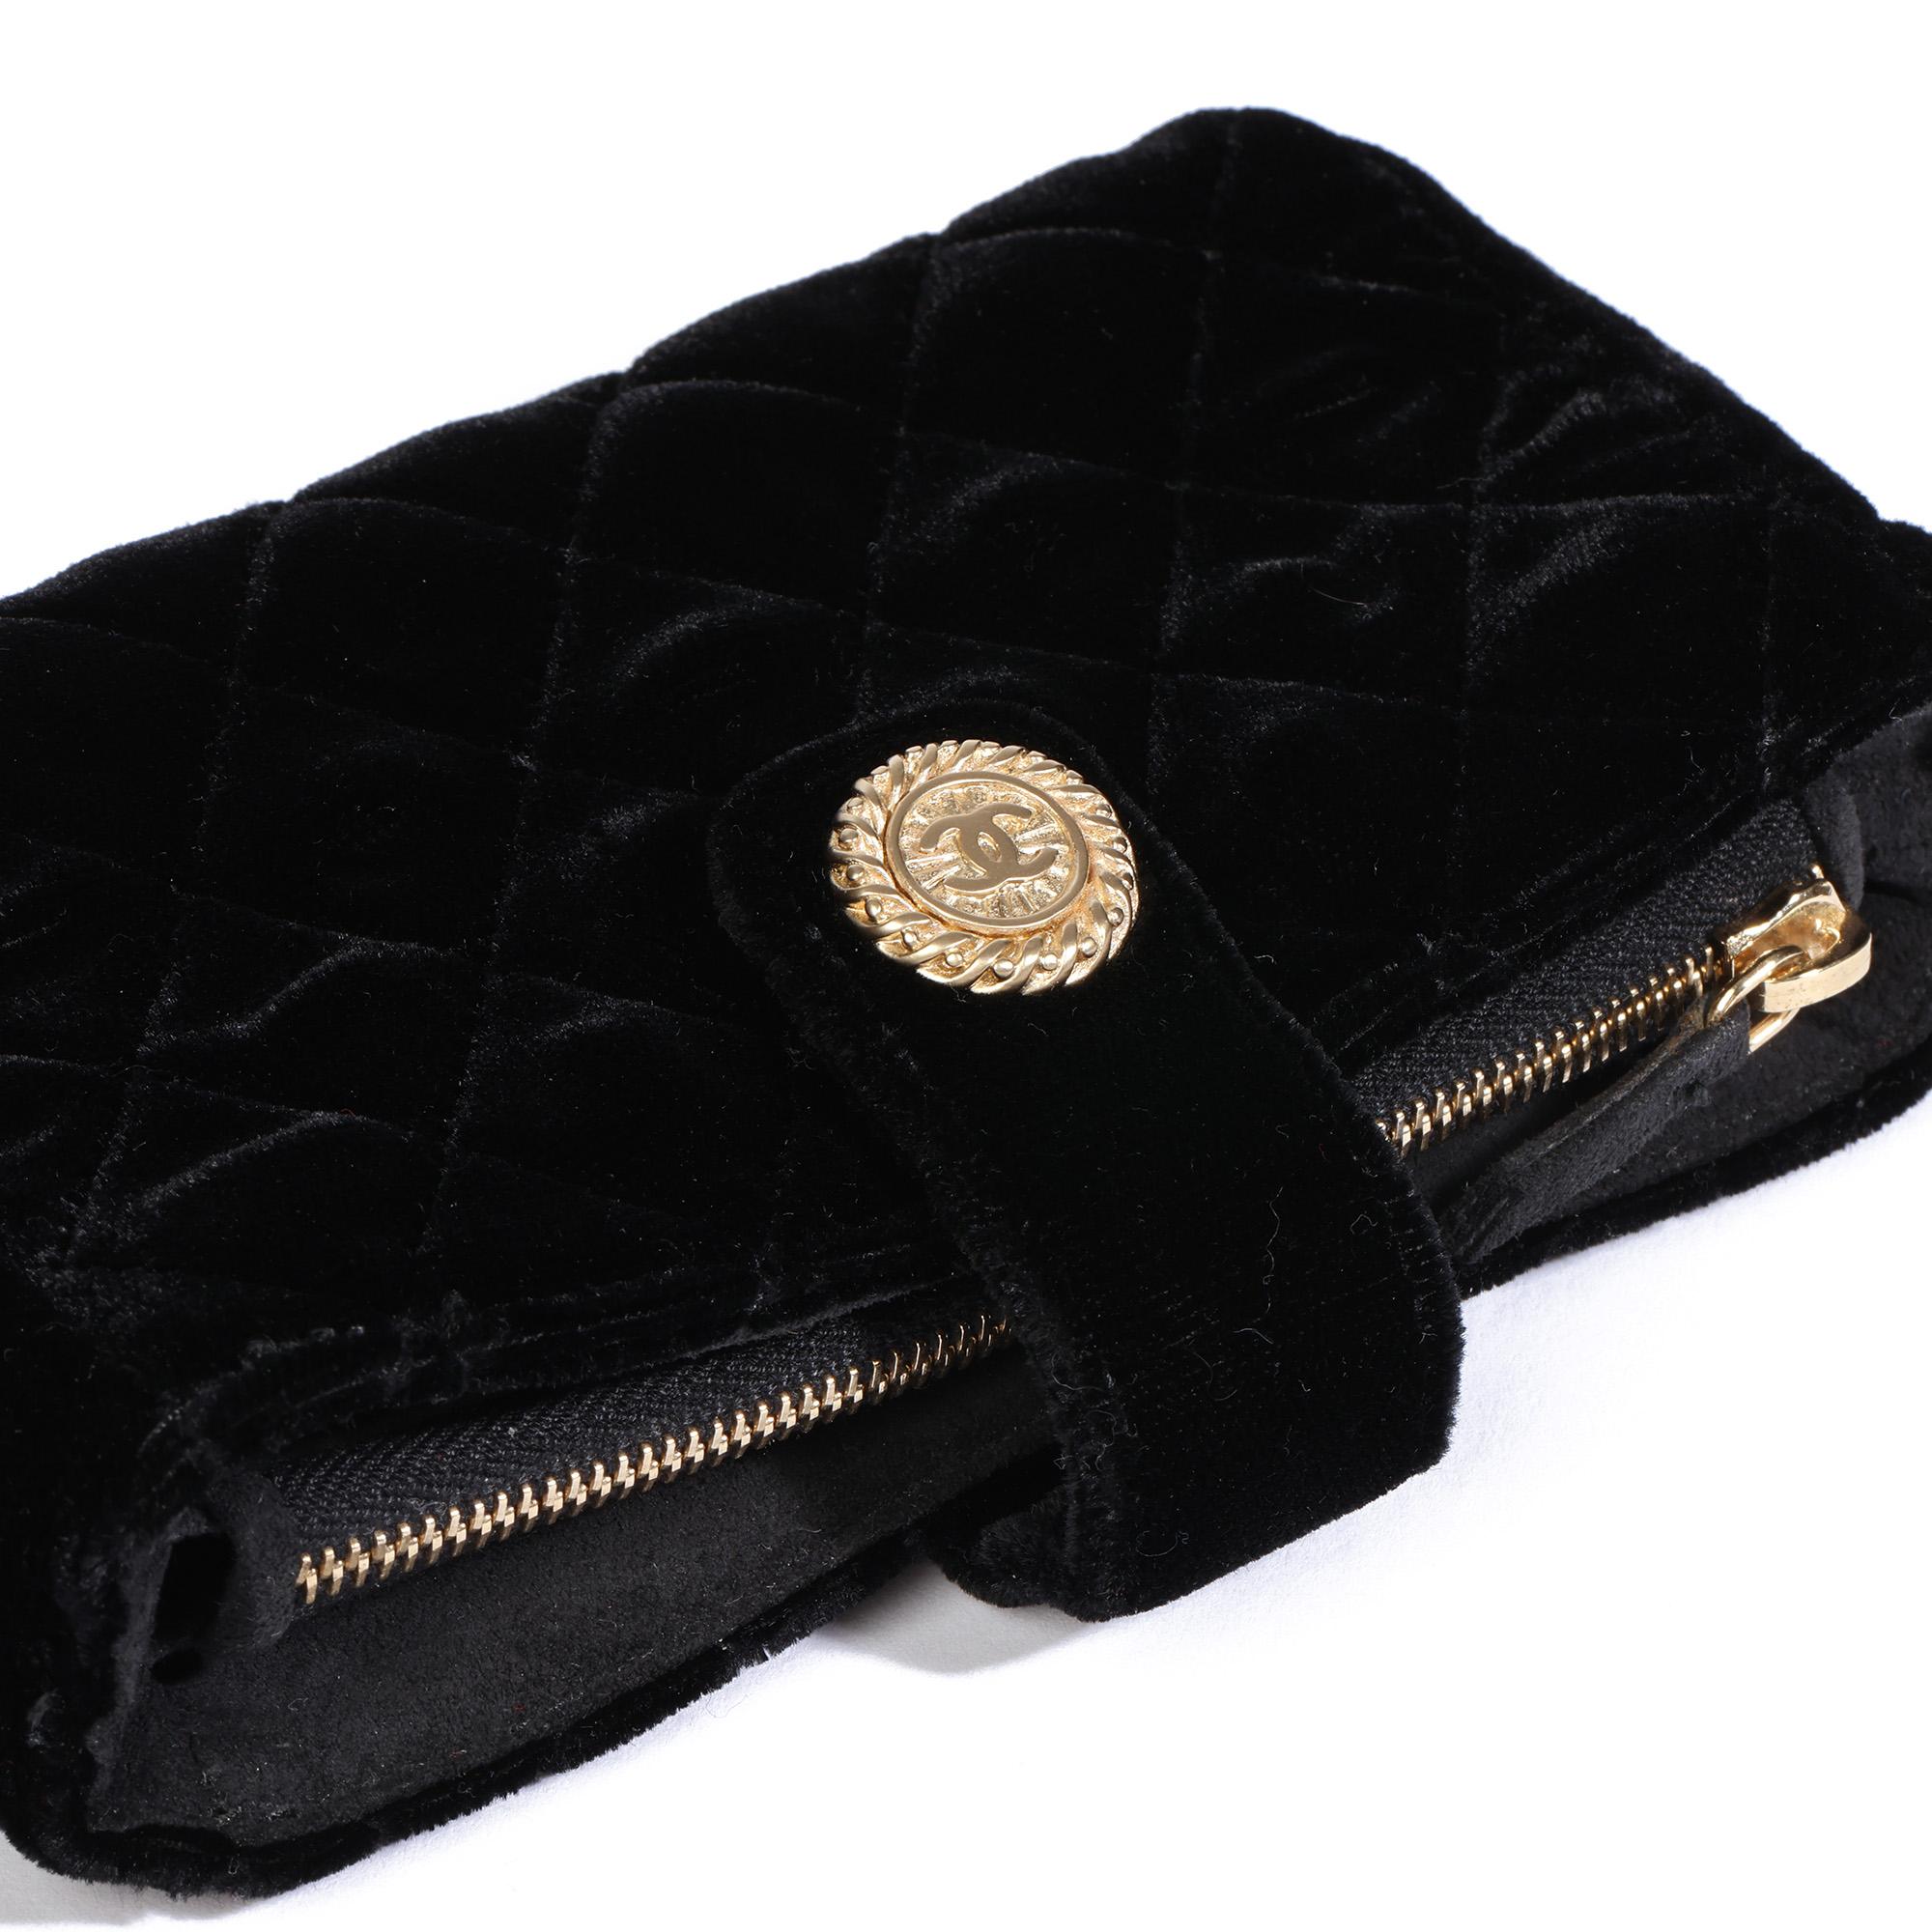 Chanel BLACK QUILTED VELVET LEATHER MINI POUCH

CONDITION NOTES
The exterior is excellent condition with light signs of use.
The interior is in excellent condition with light signs of use.
The hardware is in excellent condition with light signs of